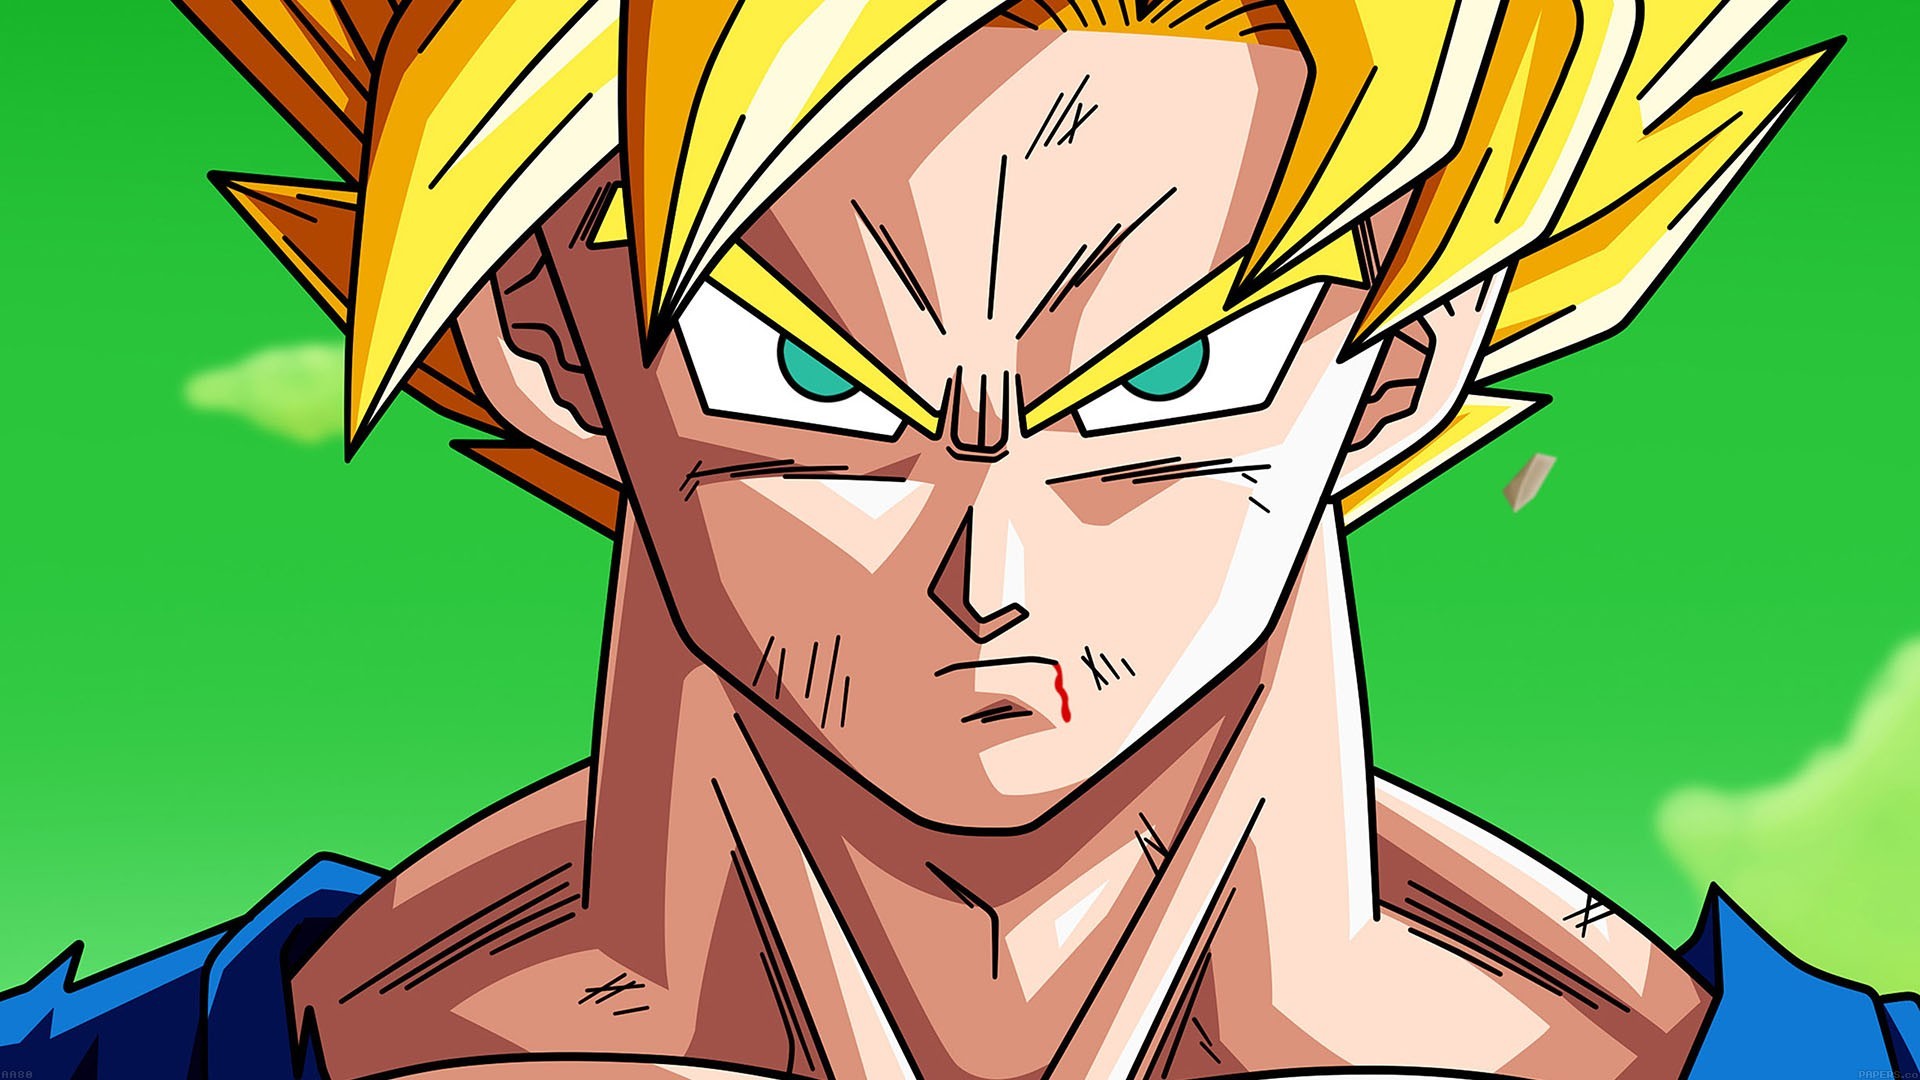 HD Wallpaper Goku Super Saiyan With Resolution 1920X1080 pixel. You can make this wallpaper for your Desktop Computer Backgrounds, Mac Wallpapers, Android Lock screen or iPhone Screensavers